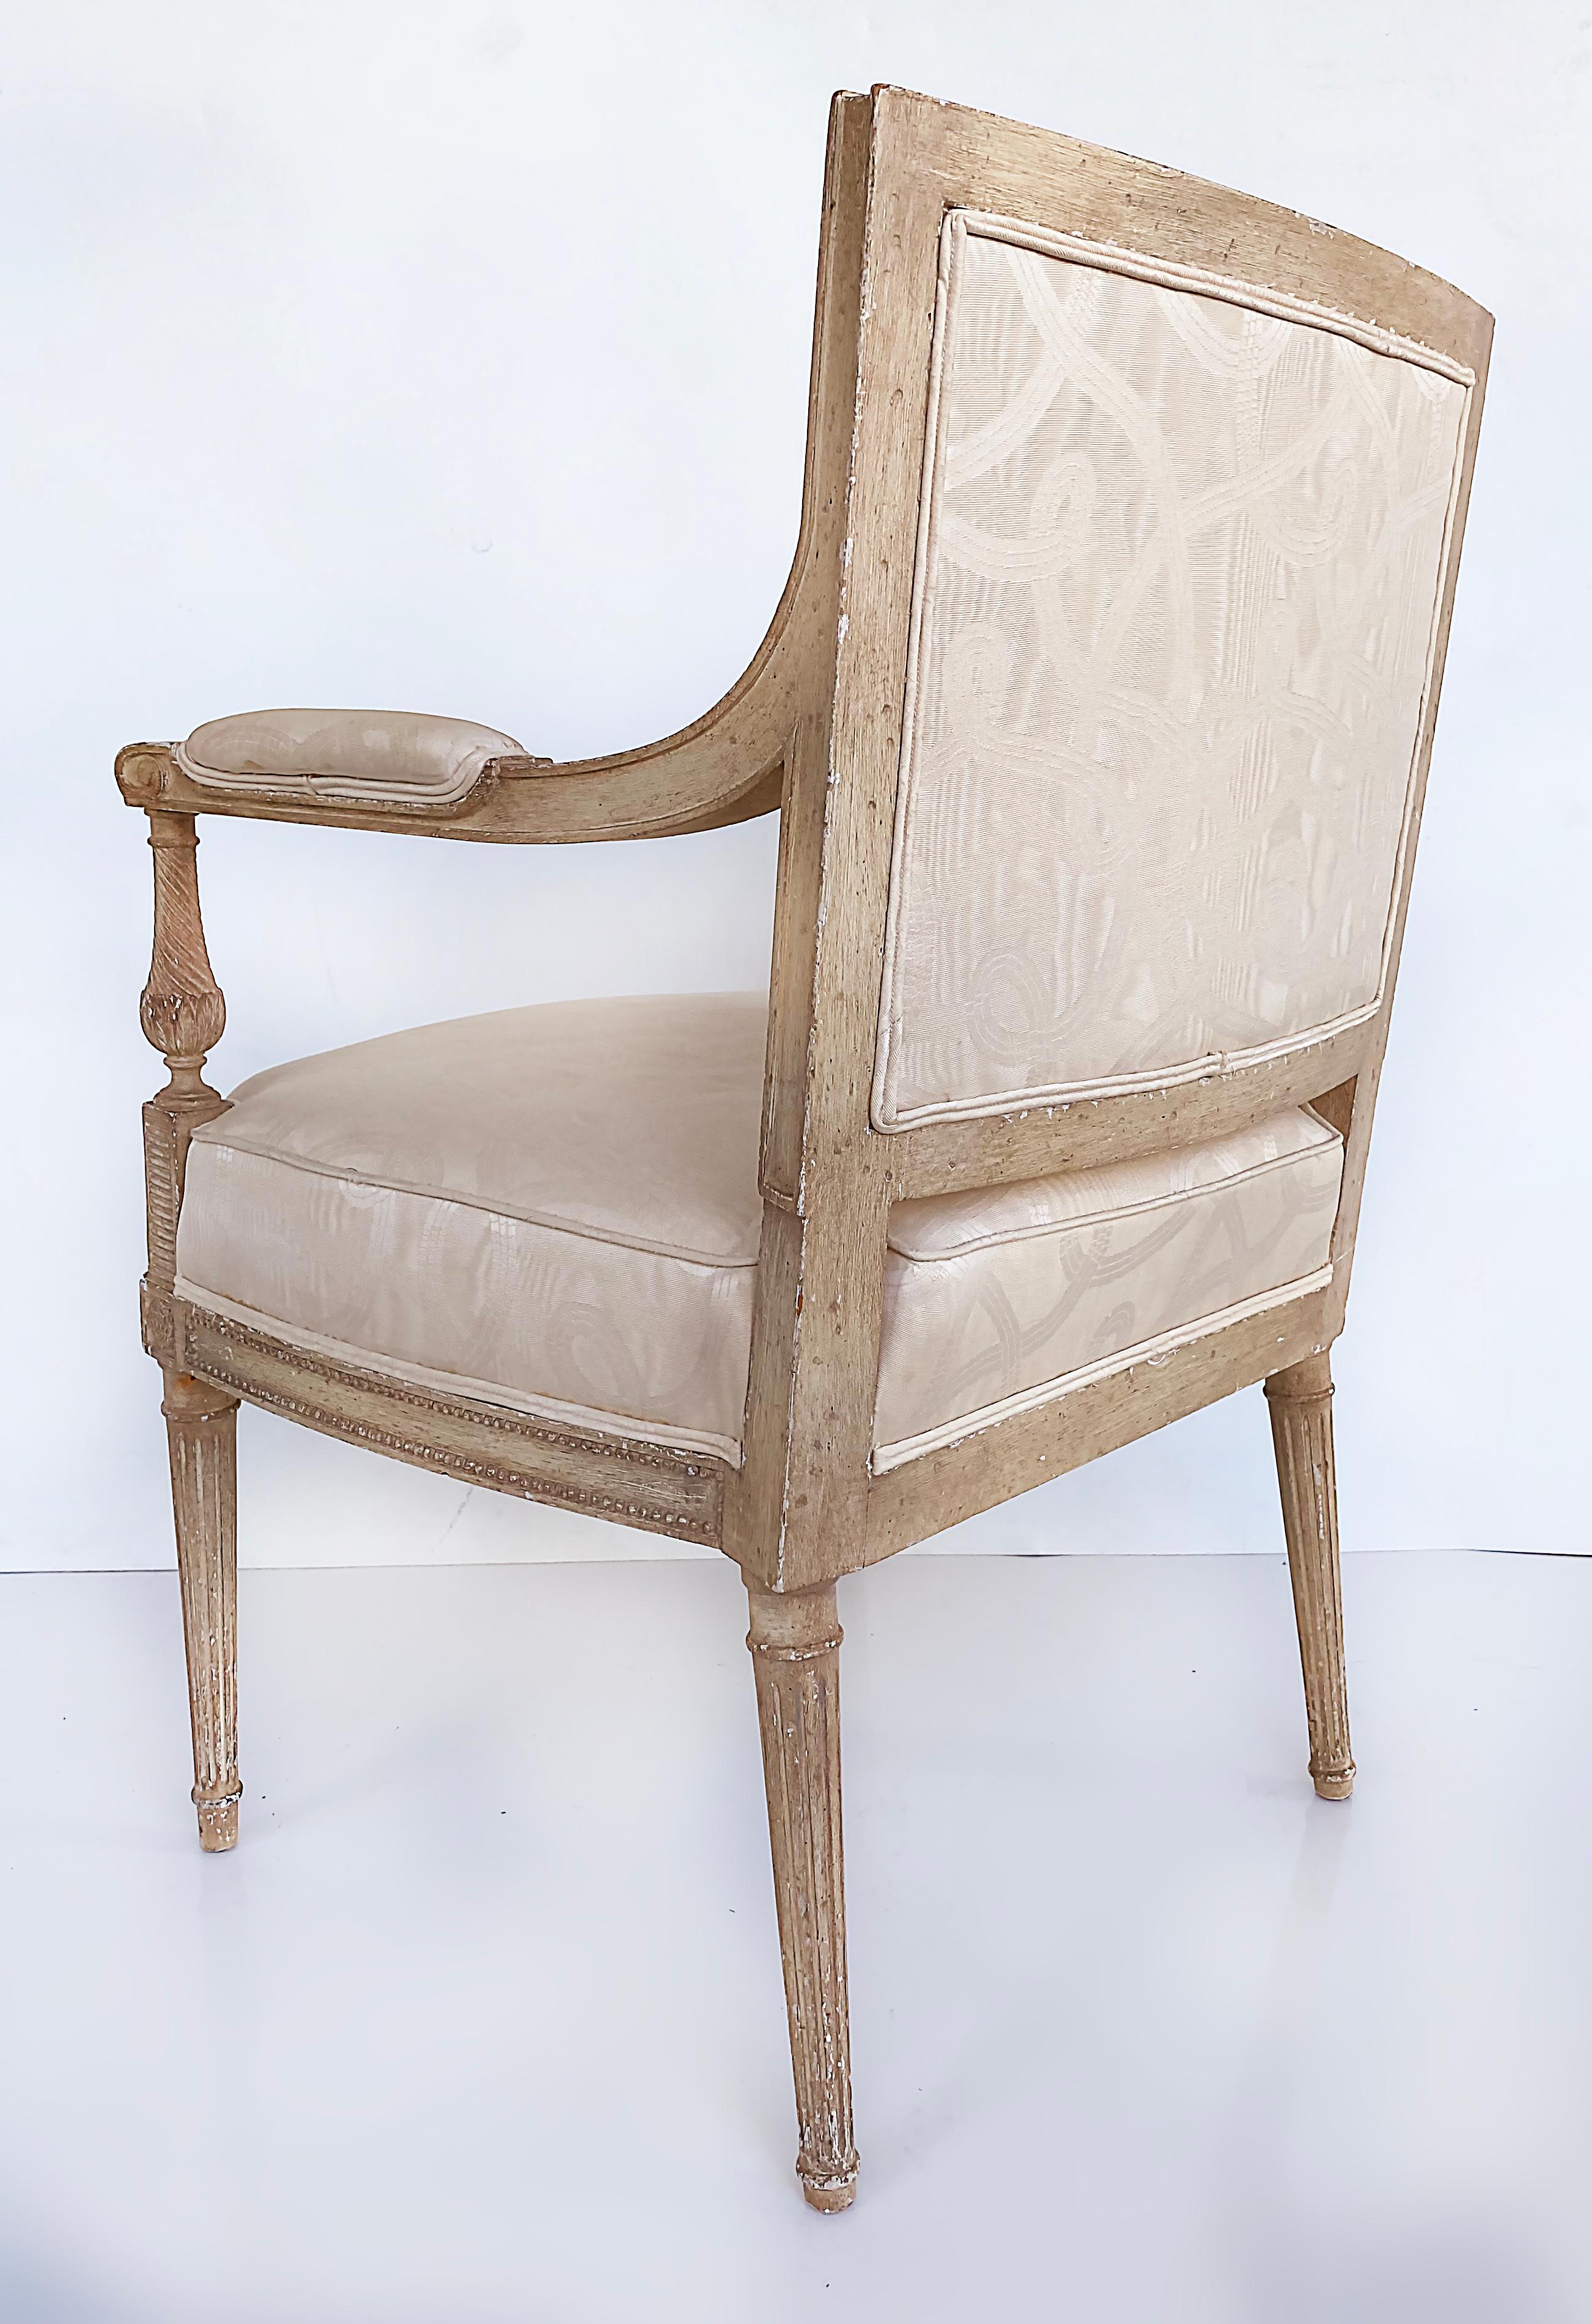 Fabric French Louis XVI Style Painted Fauteuil Armchairs, Late 19th Century -Early 20th For Sale